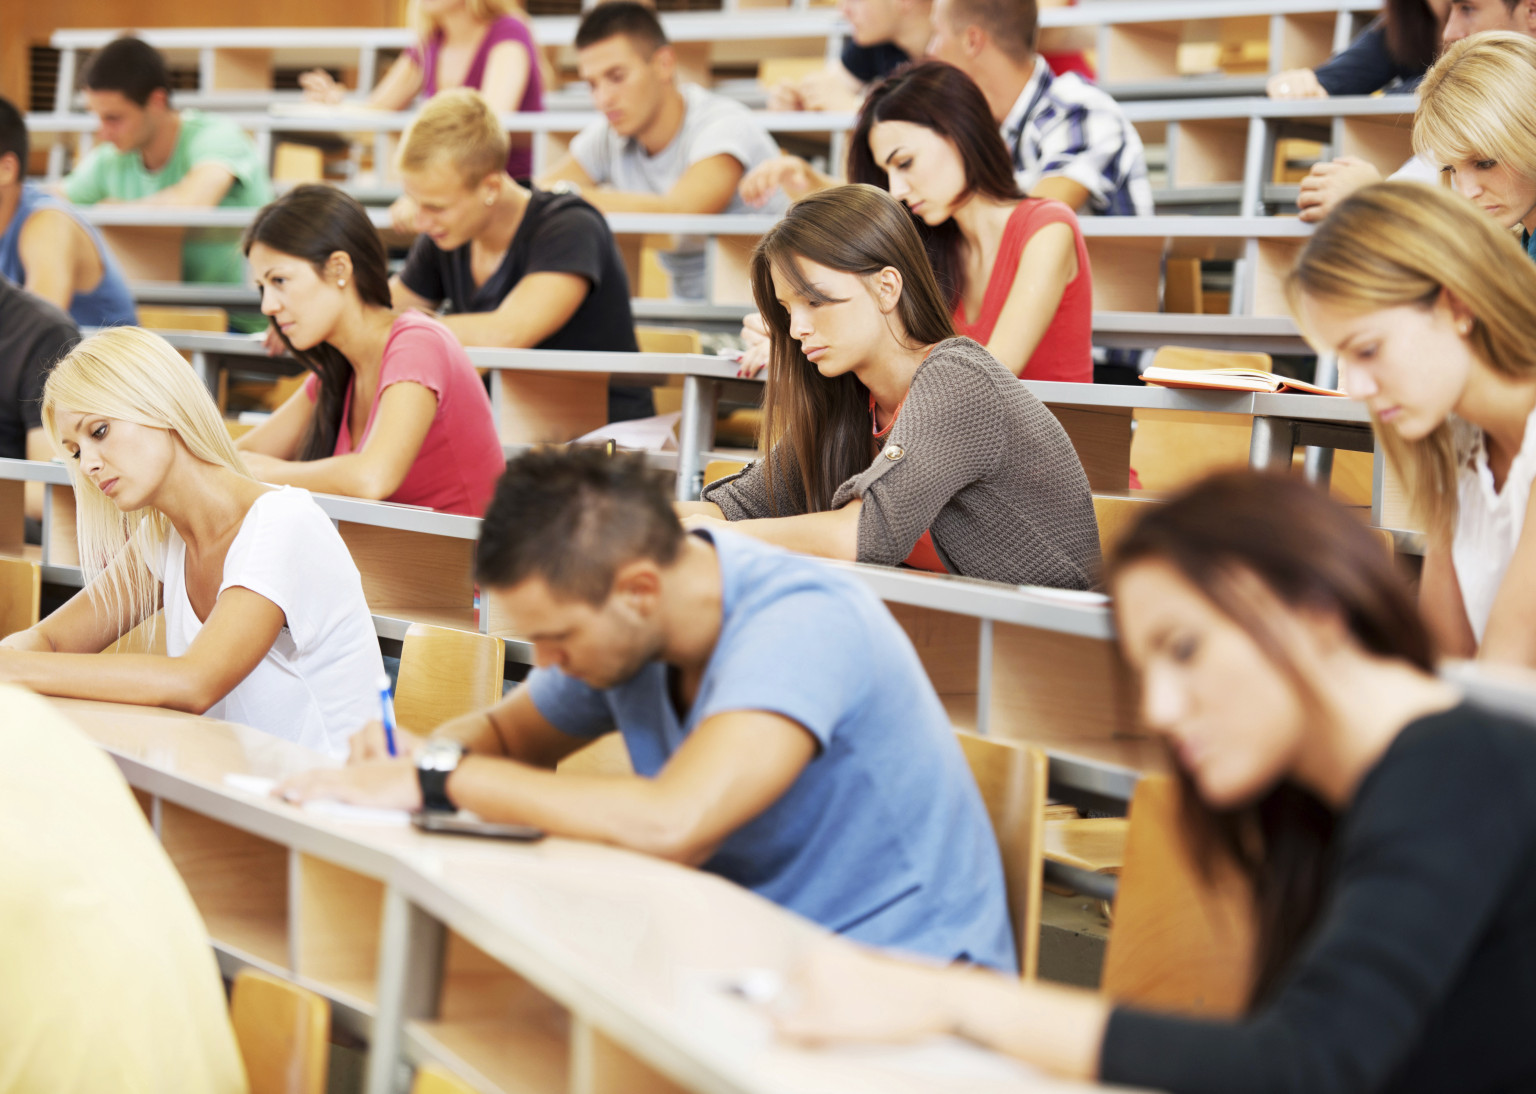 Does class time affect student performance?